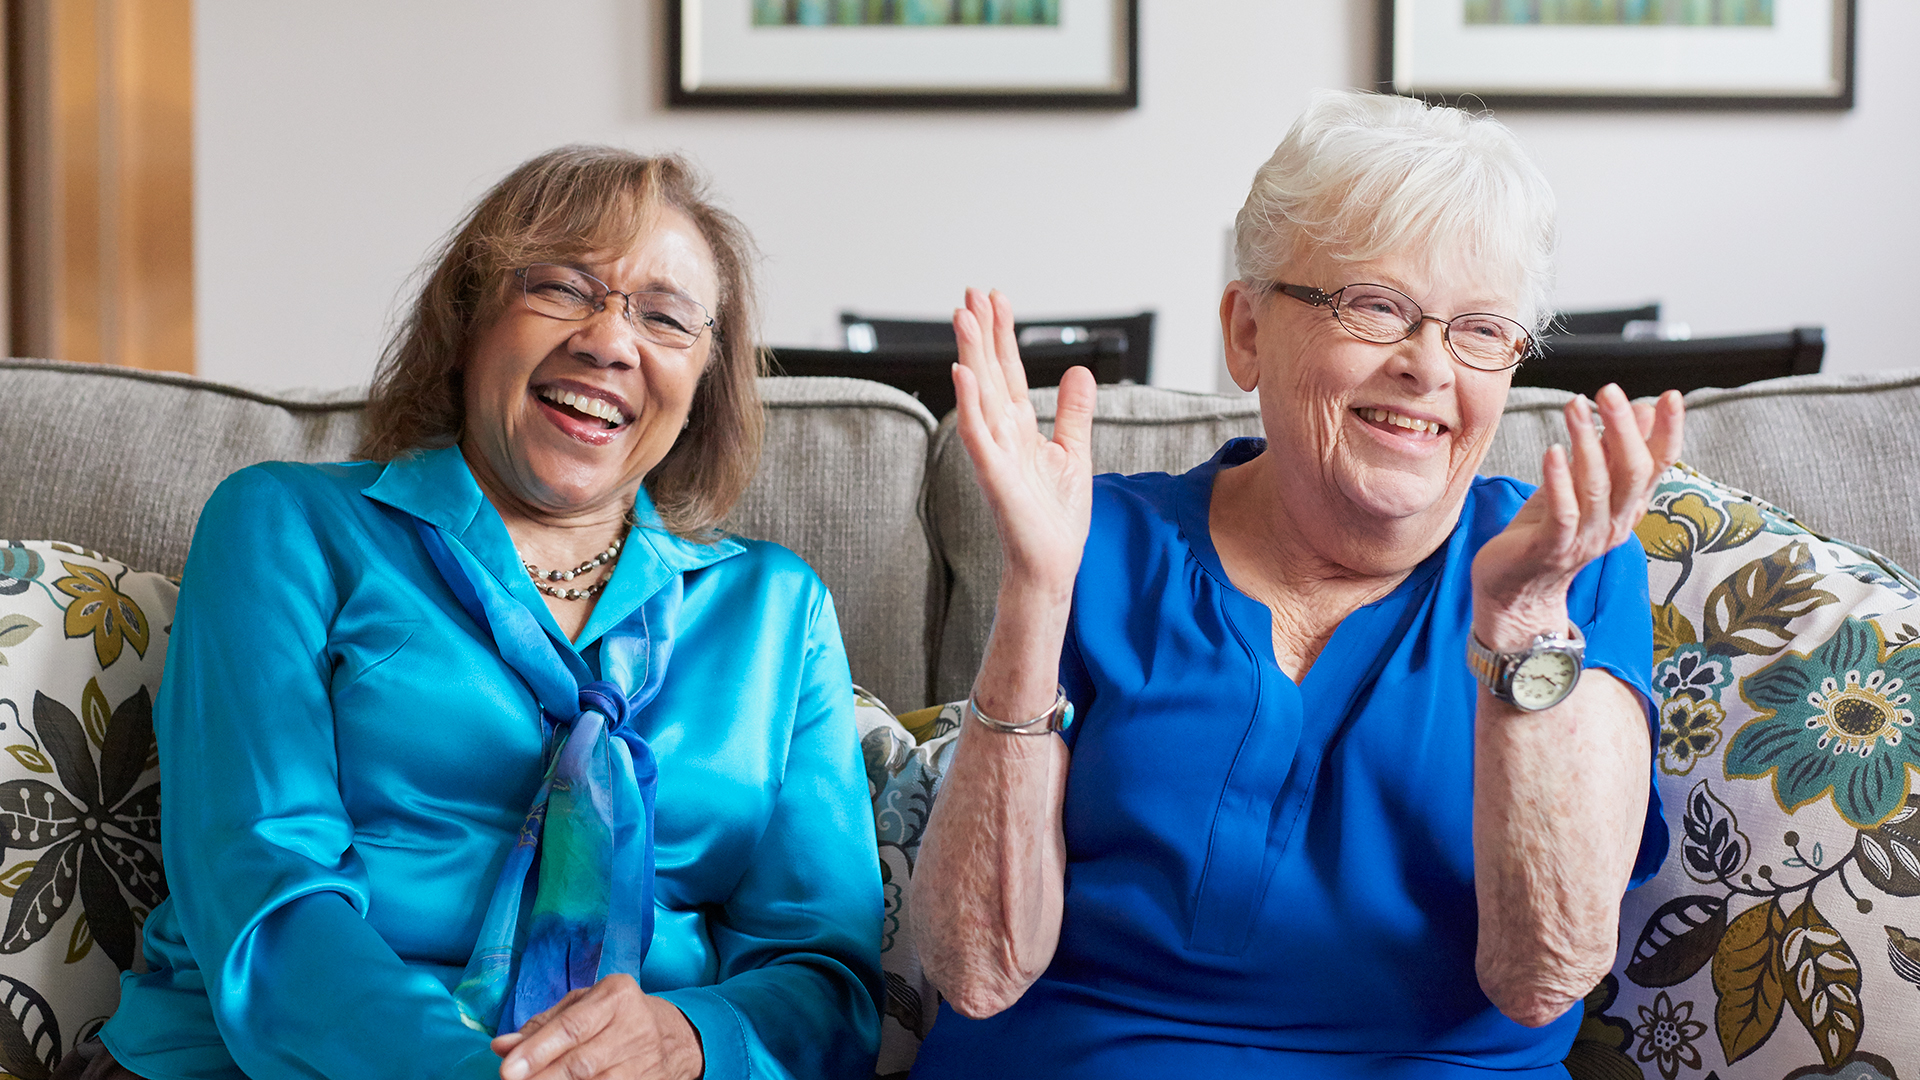 senior women sitting on a couch laughing together